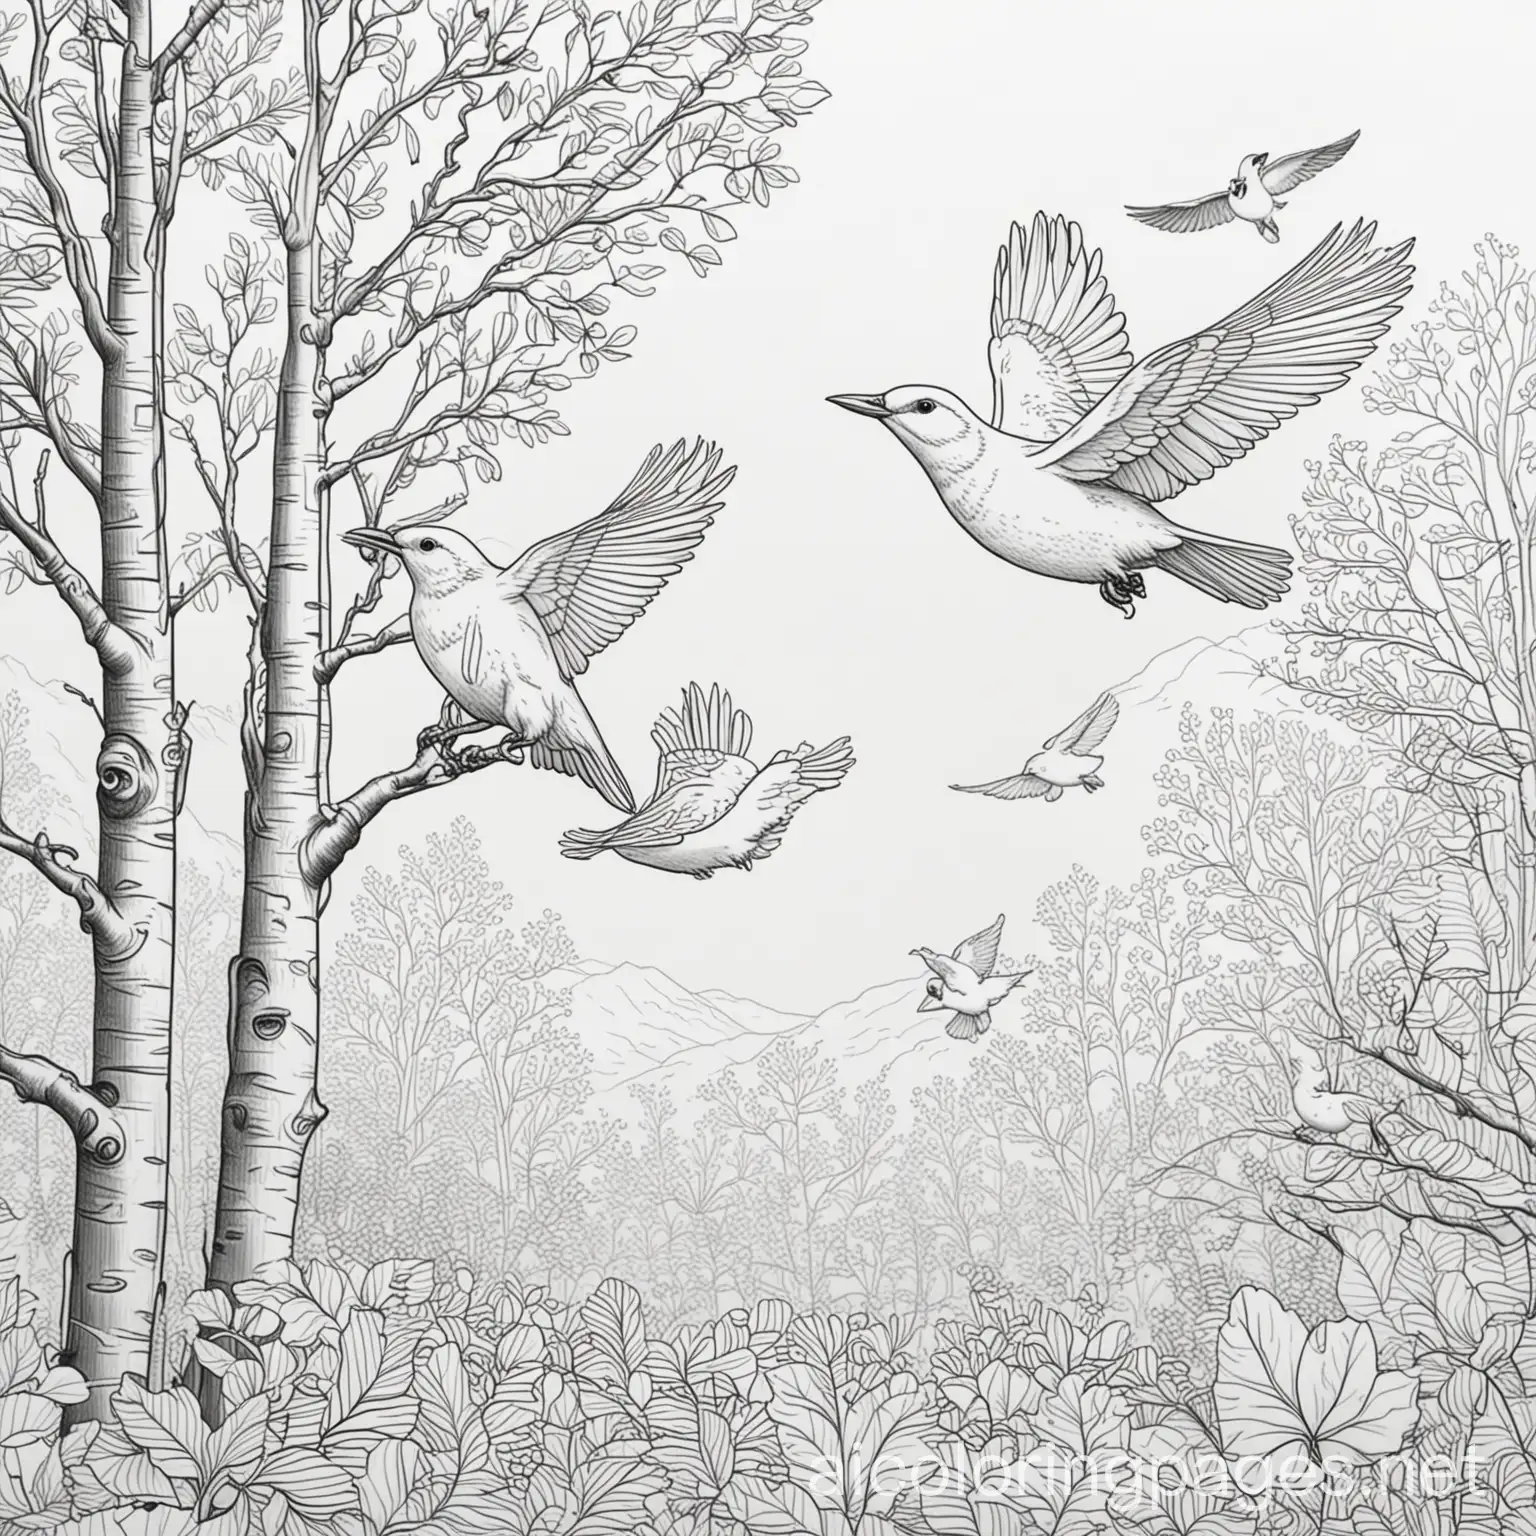 birds flying through the trees , Coloring Page, black and white, line art, white background, Simplicity, Ample White Space. The background of the coloring page is plain white to make it easy for young children to color within the lines. The outlines of all the subjects are easy to distinguish, making it simple for kids to color without too much difficulty, Coloring Page, black and white, line art, white background, Simplicity, Ample White Space. The background of the coloring page is plain white to make it easy for young children to color within the lines. The outlines of all the subjects are easy to distinguish, making it simple for kids to color without too much difficulty